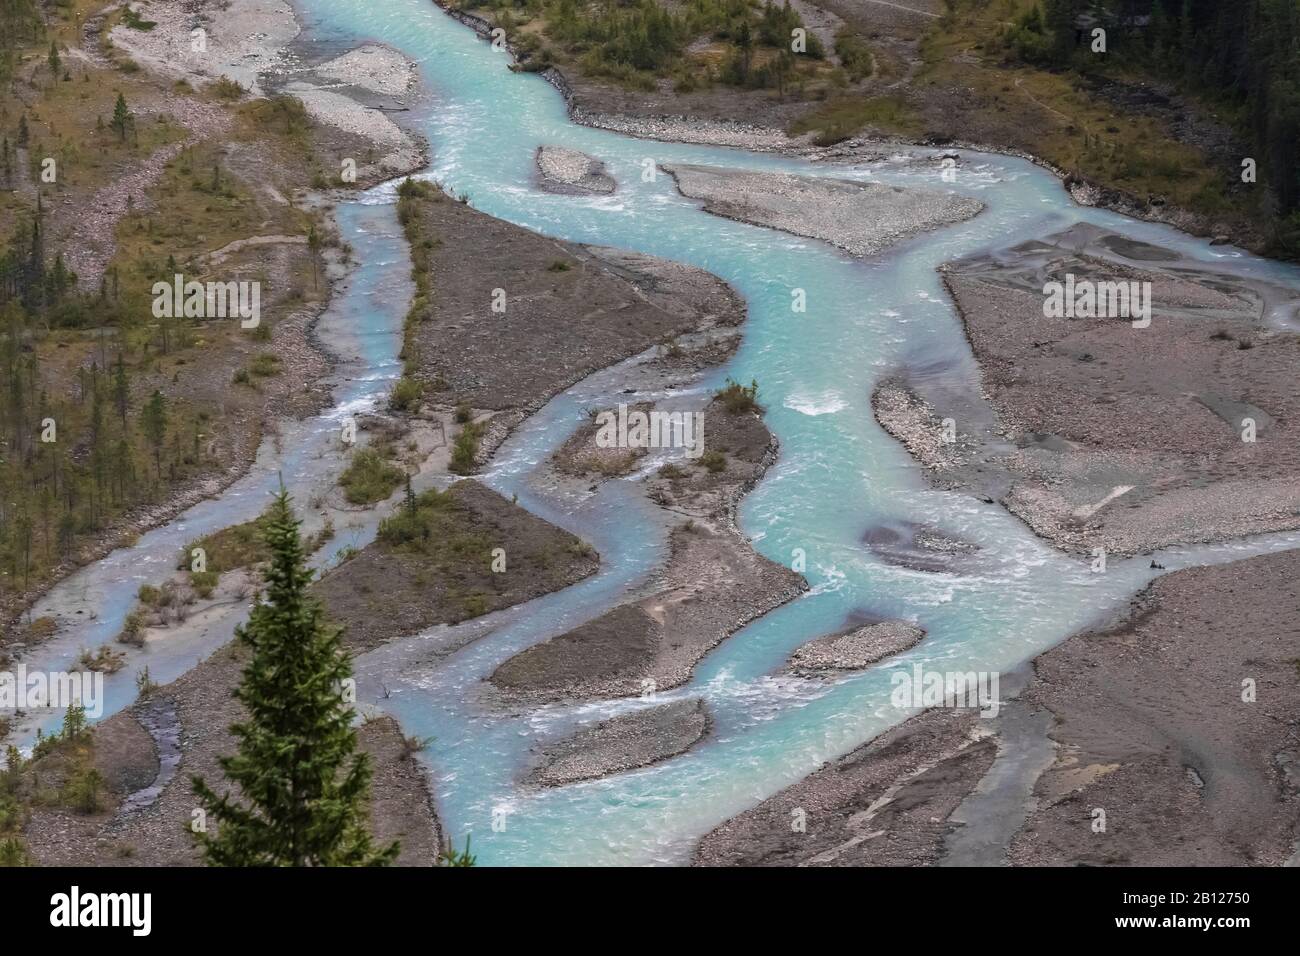 Braided section of the Robson River in Mount Robson Provincial Park, British Columbia, Canada Stock Photo